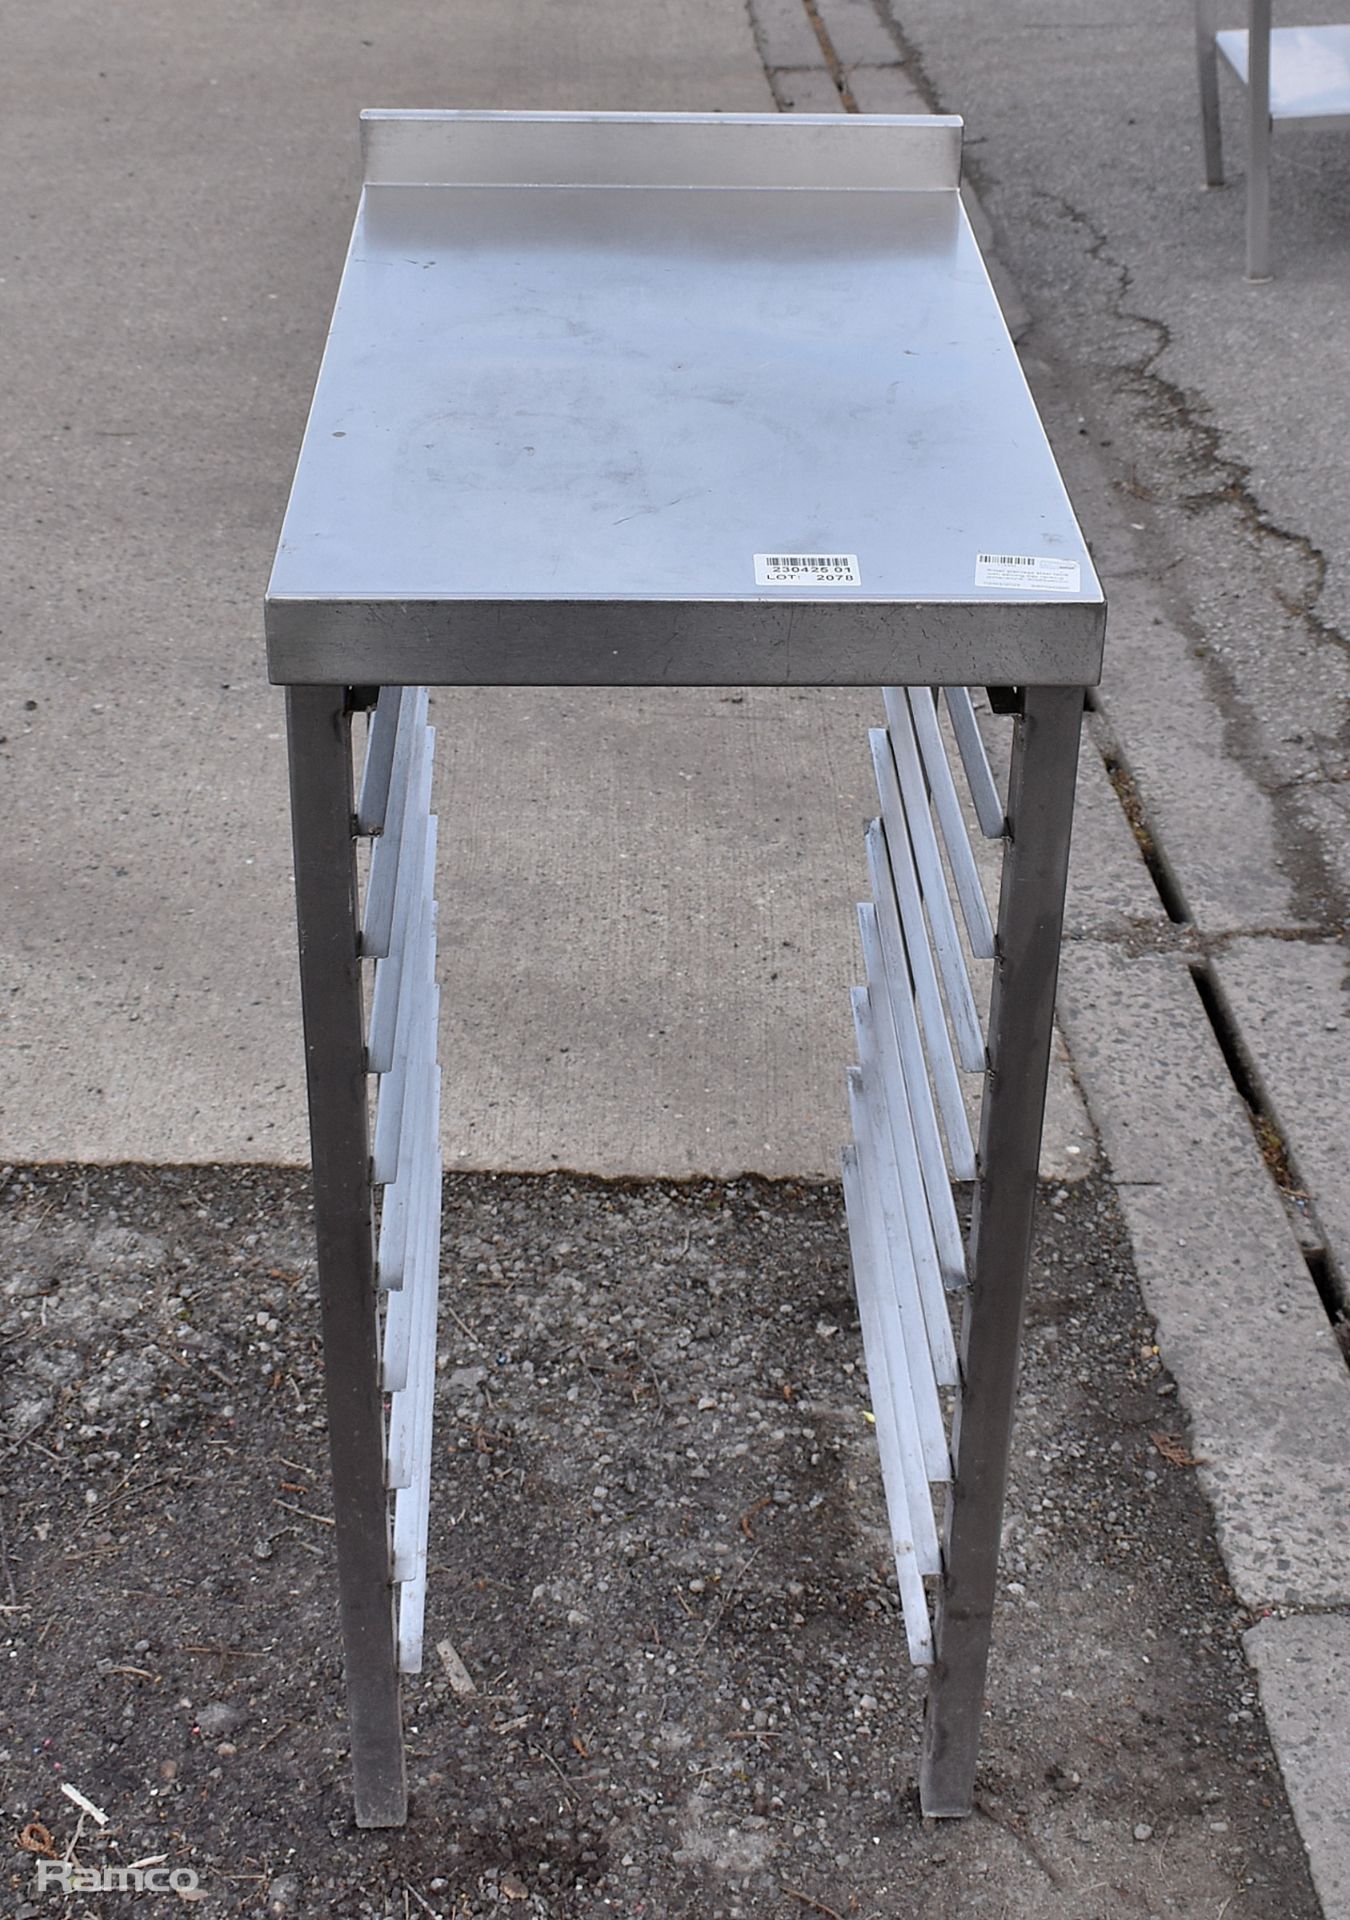 Small stainless steel table with serving tray racking - dimensions: 40 x 65 x 90cm